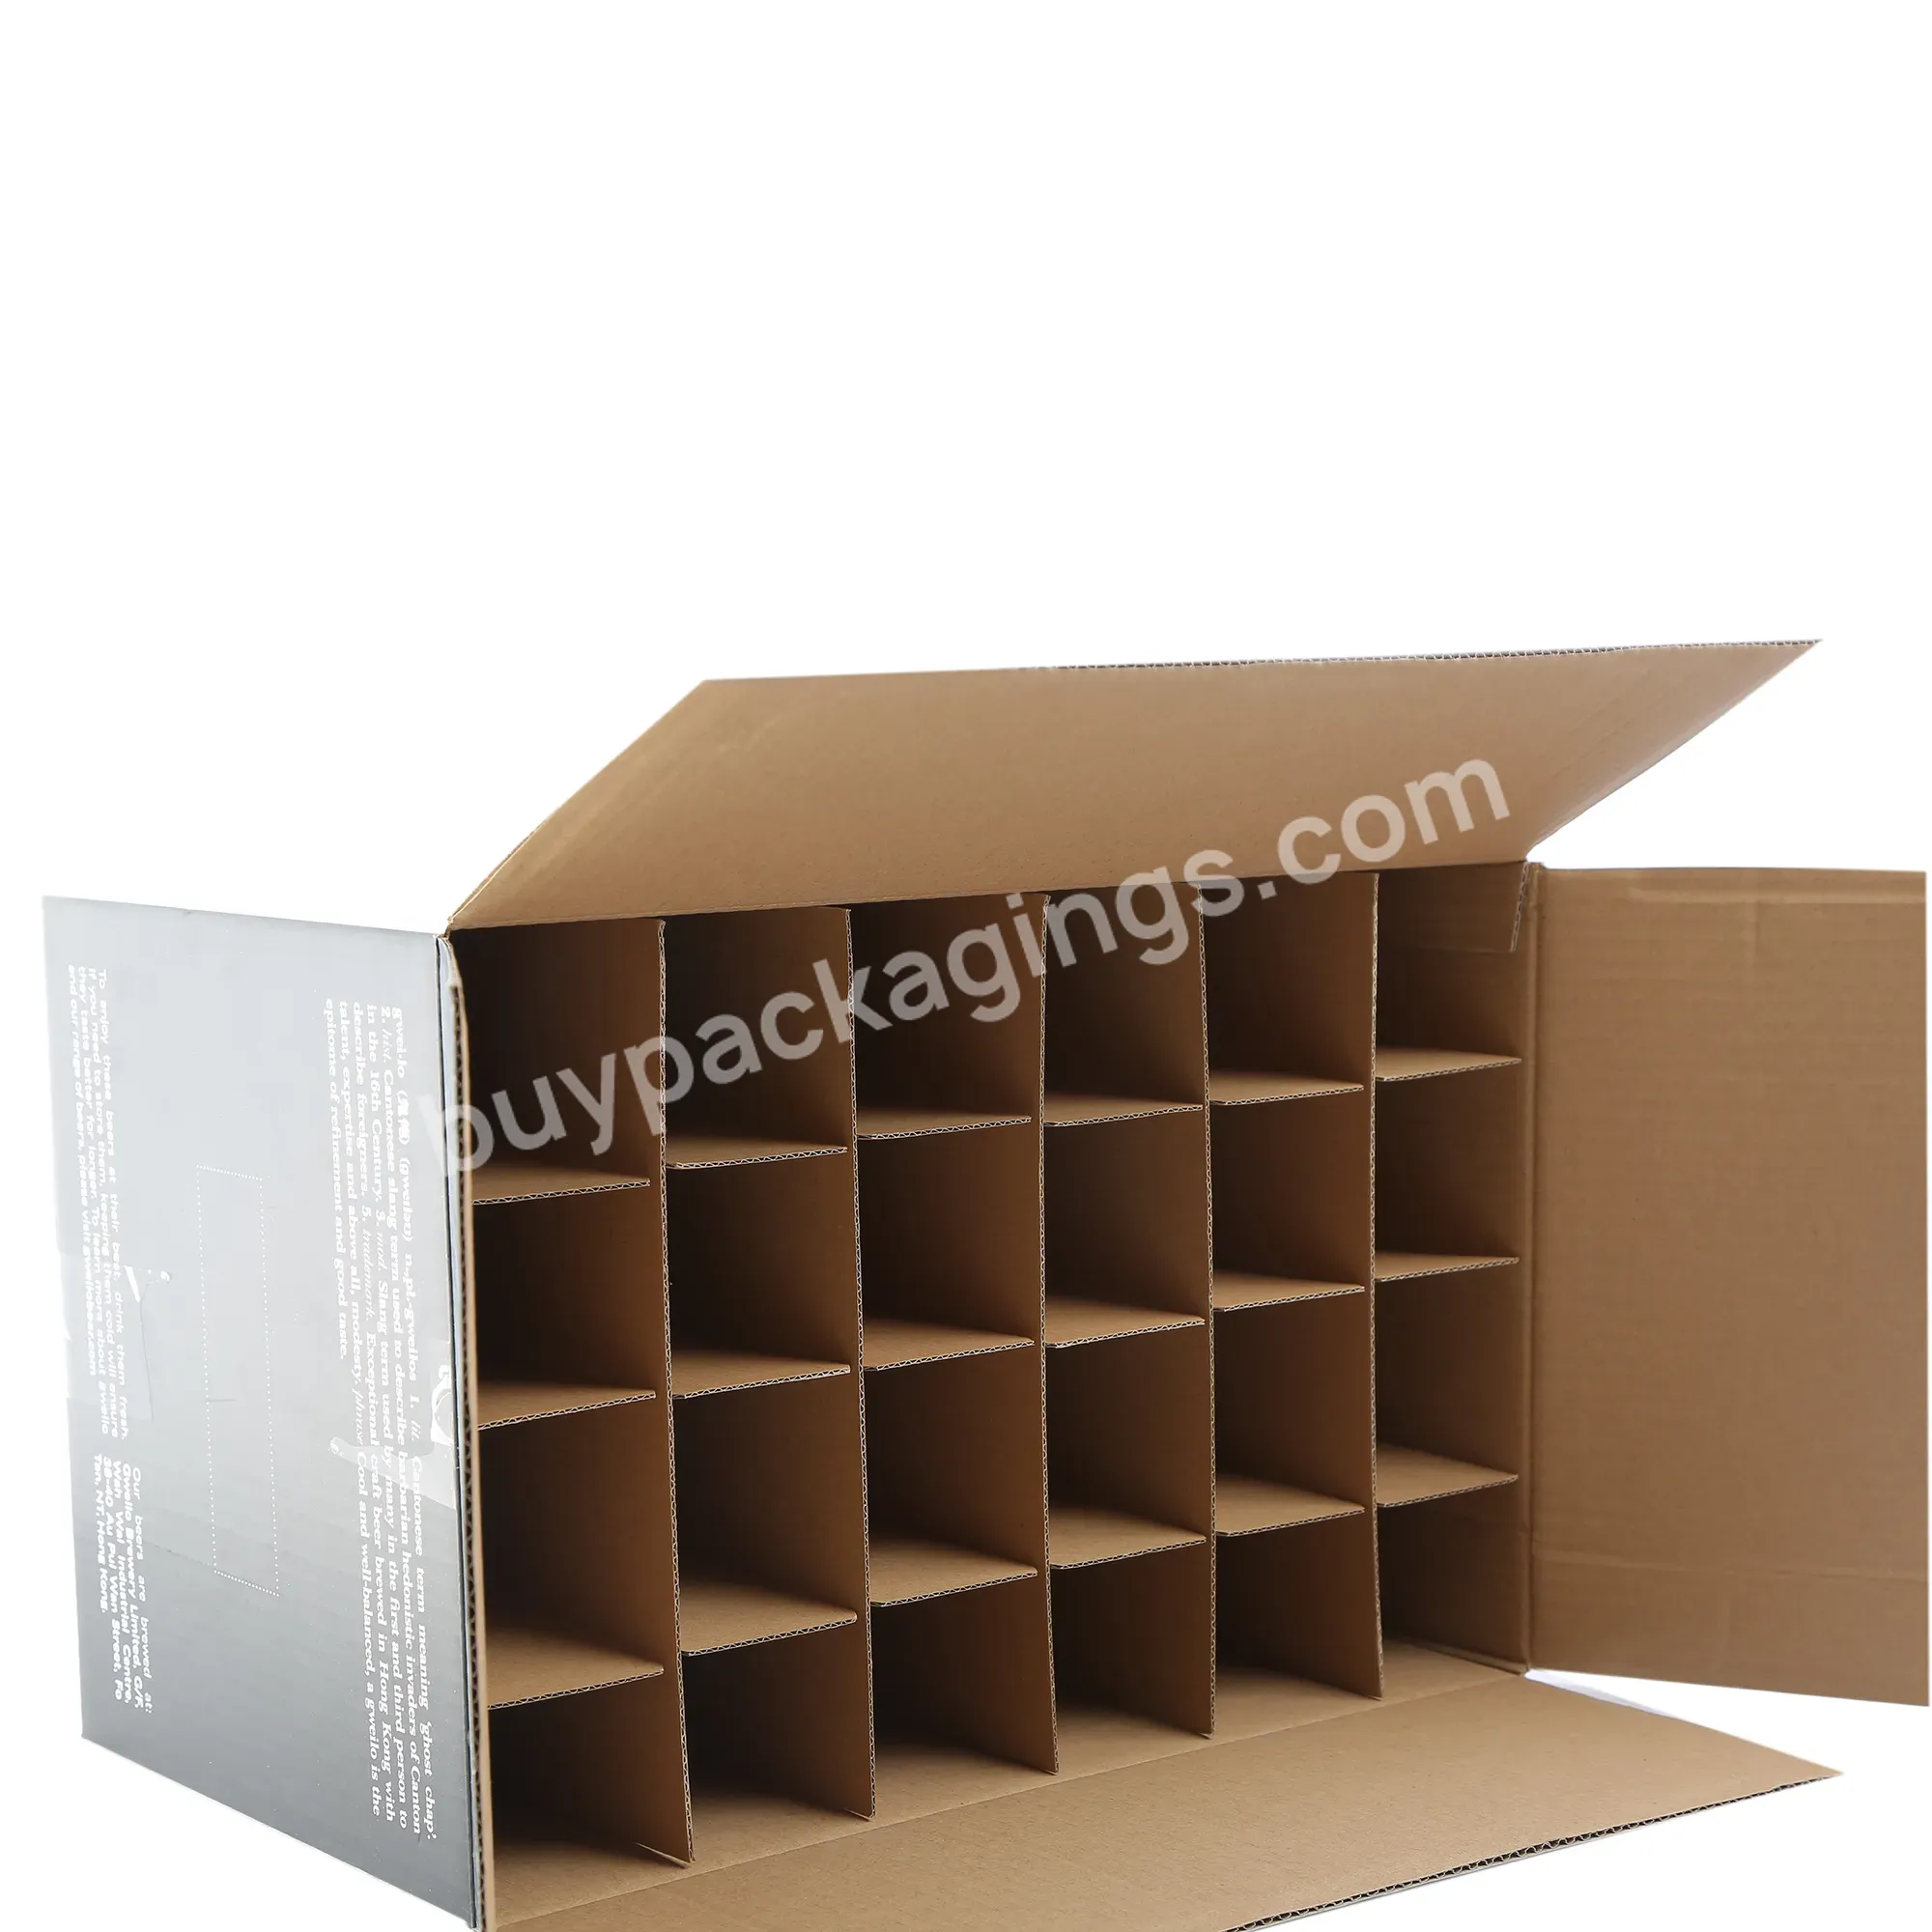 Oem Factory Custom Sturdy Cardboard Corrugated Wine Shipping Packaging Wine Shippers Boxes - Buy Wine Shippers Boxes,Cardboard Corrugated Wine Shipping Packaging,Oem Factory Custom Sturdy Wine Shippers Boxes.